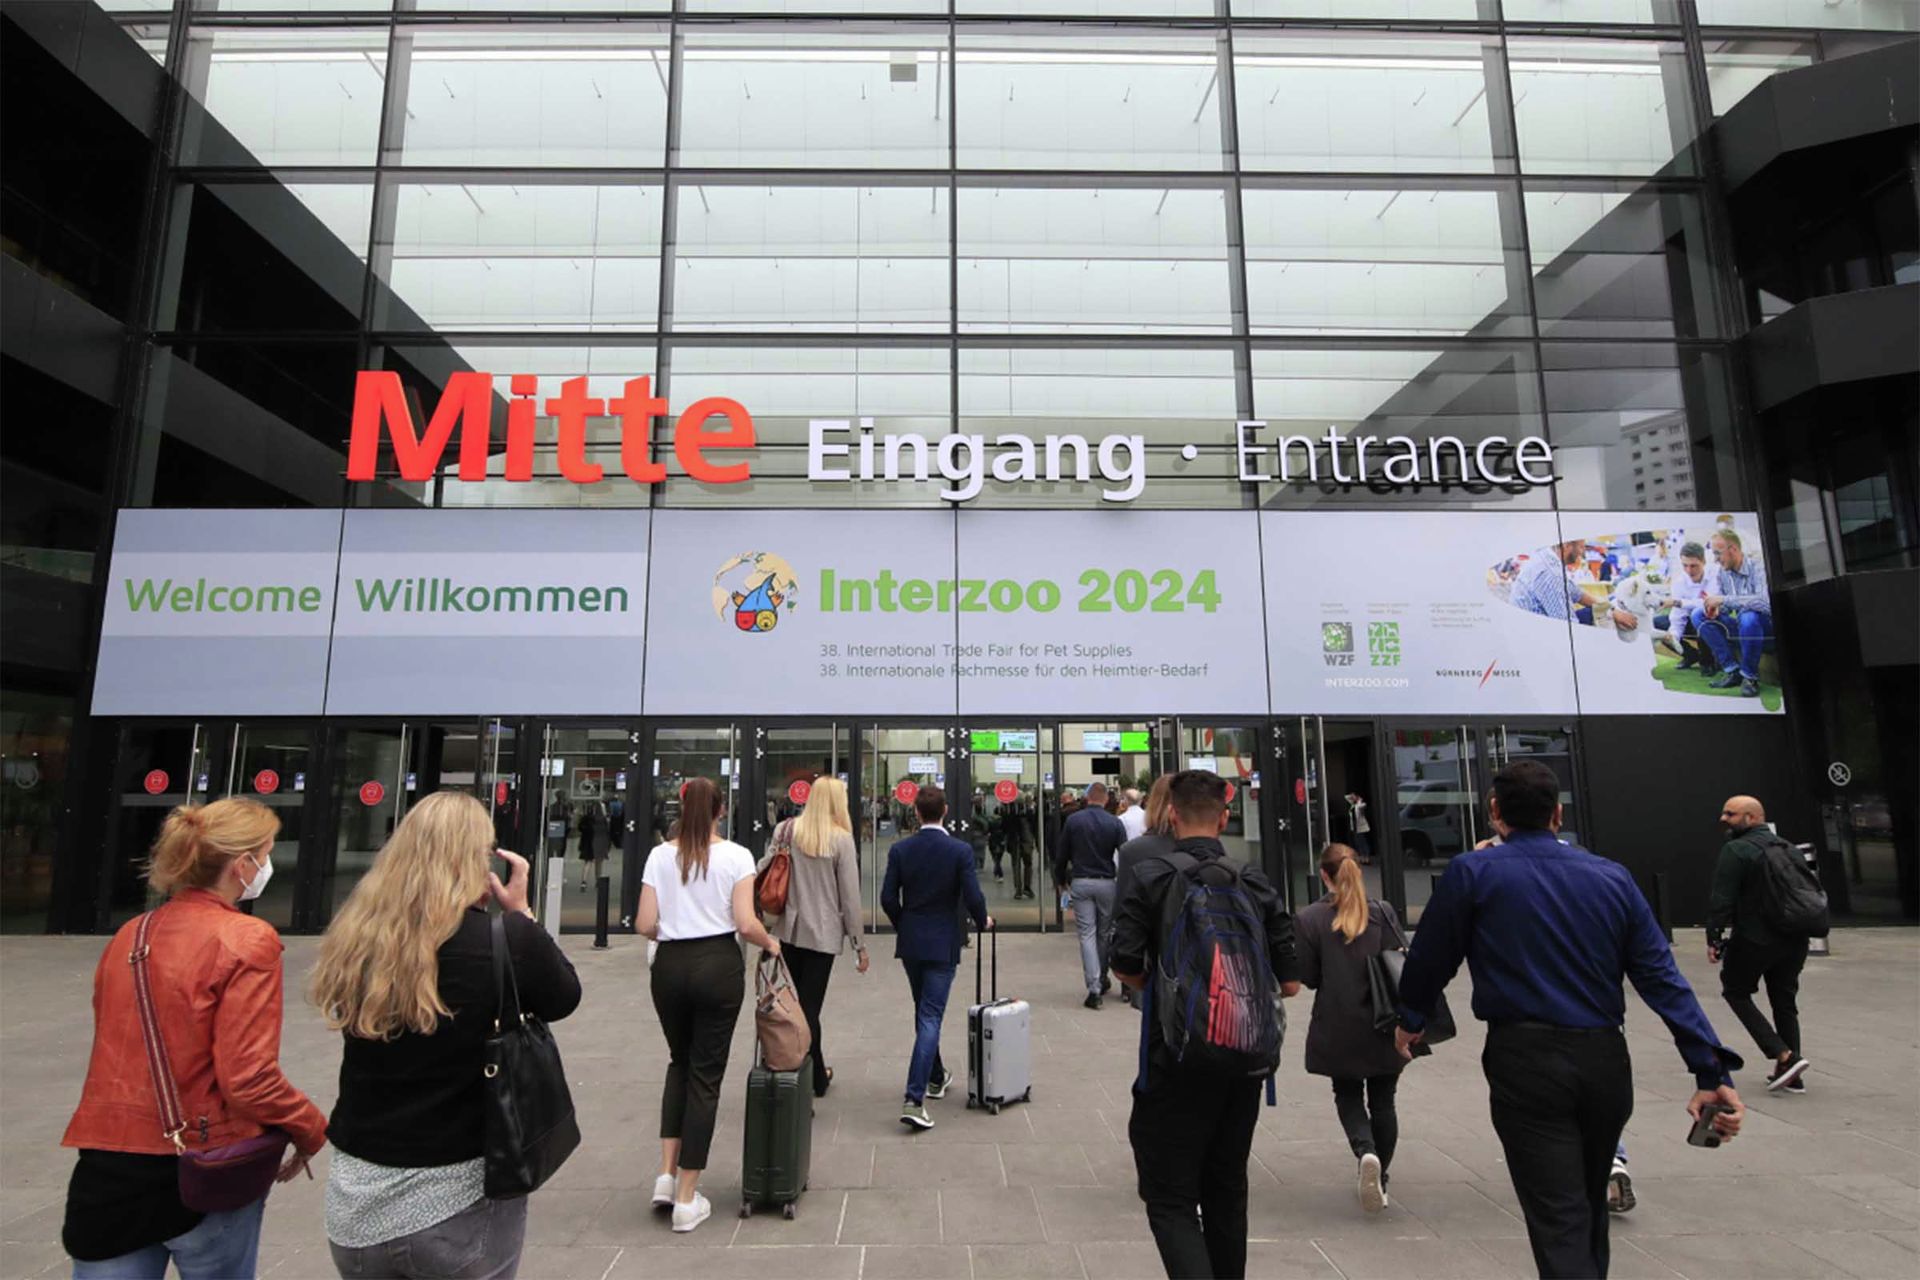 Registration for Interzoo 2024 opens now Interzoo